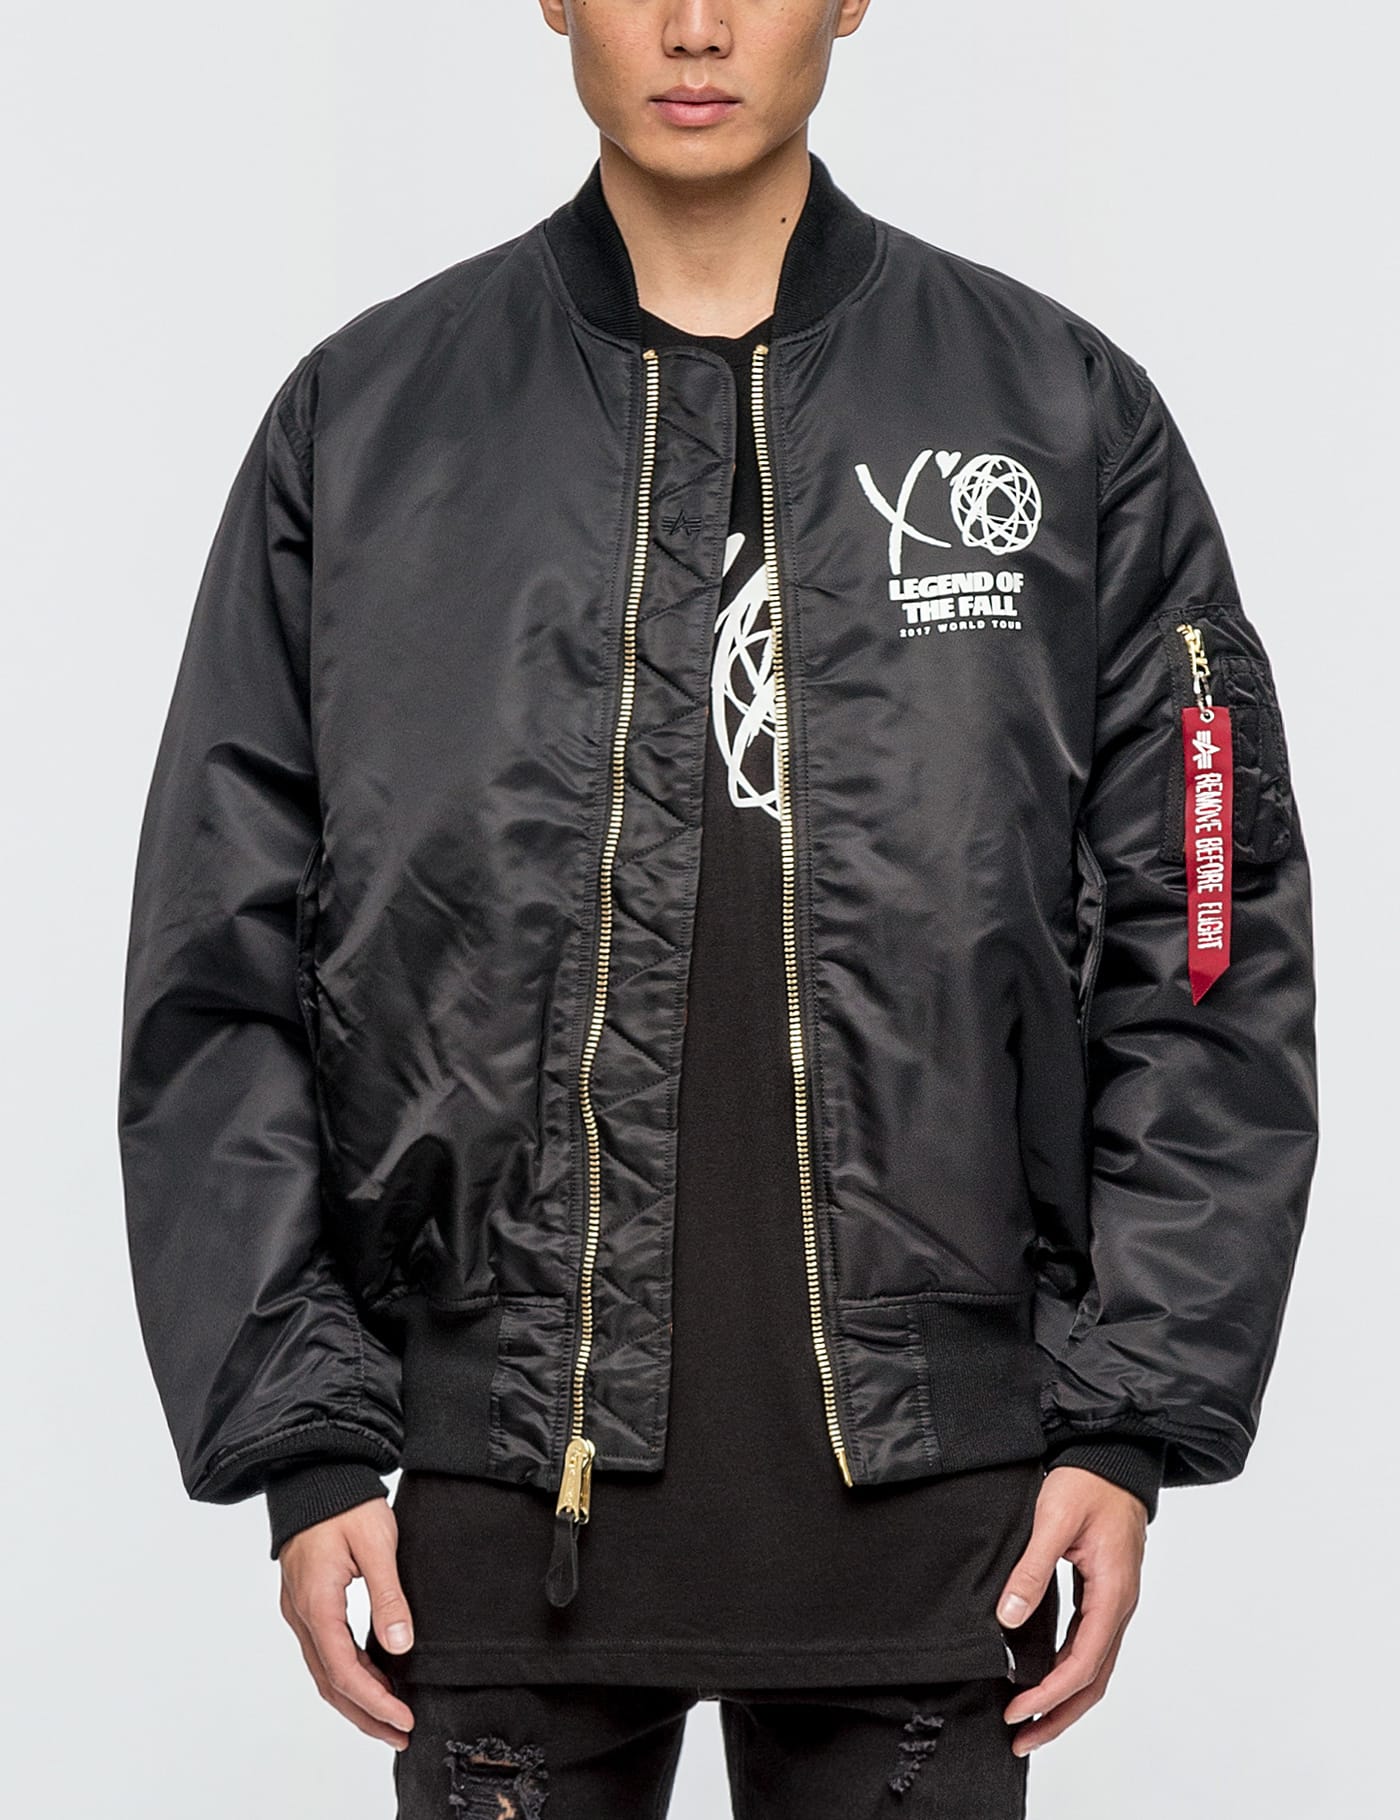 The Weeknd Starboy Bomber Jacket MA-1 www.aiesec.cl